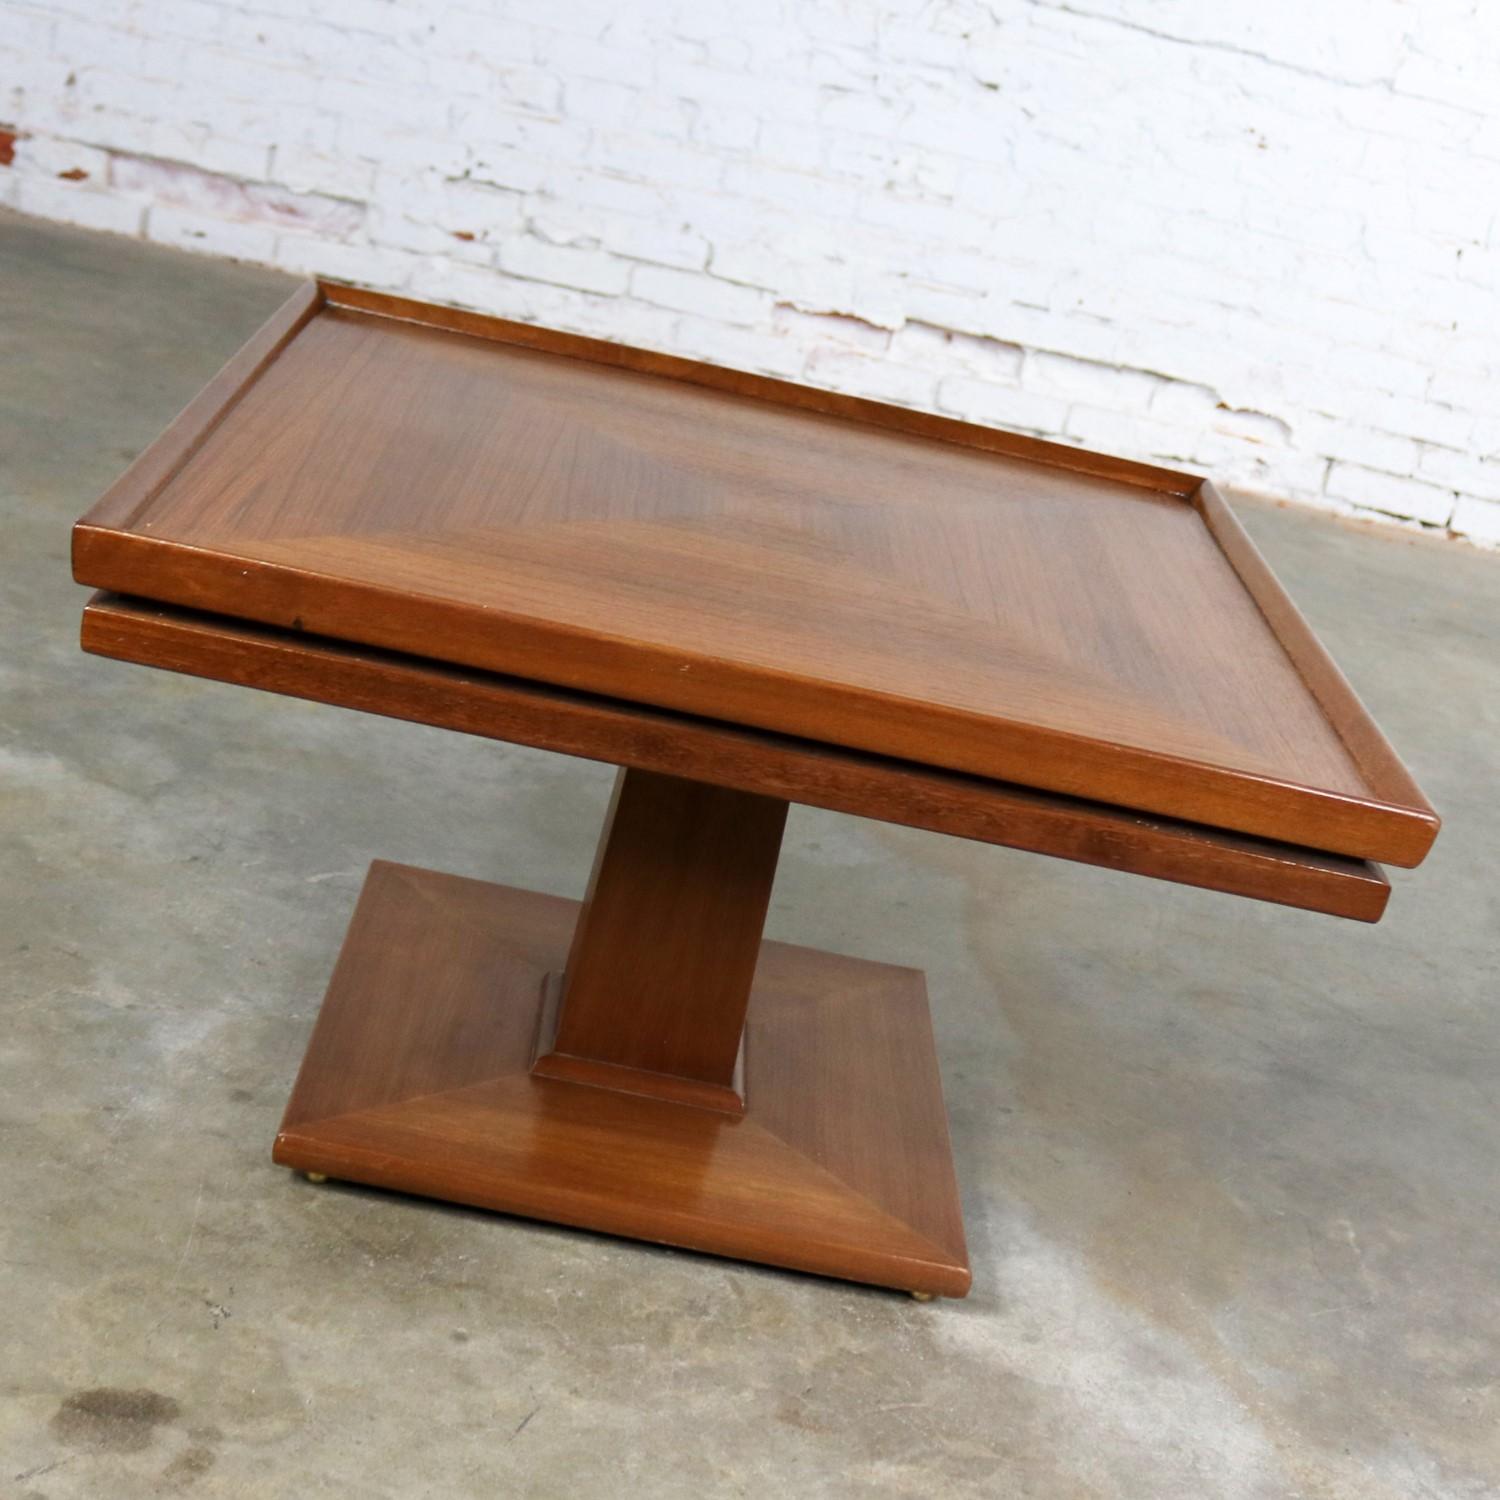 American Erwin Lambeth Midcentury Walnut Square Pedestal Side End or Lamp Table